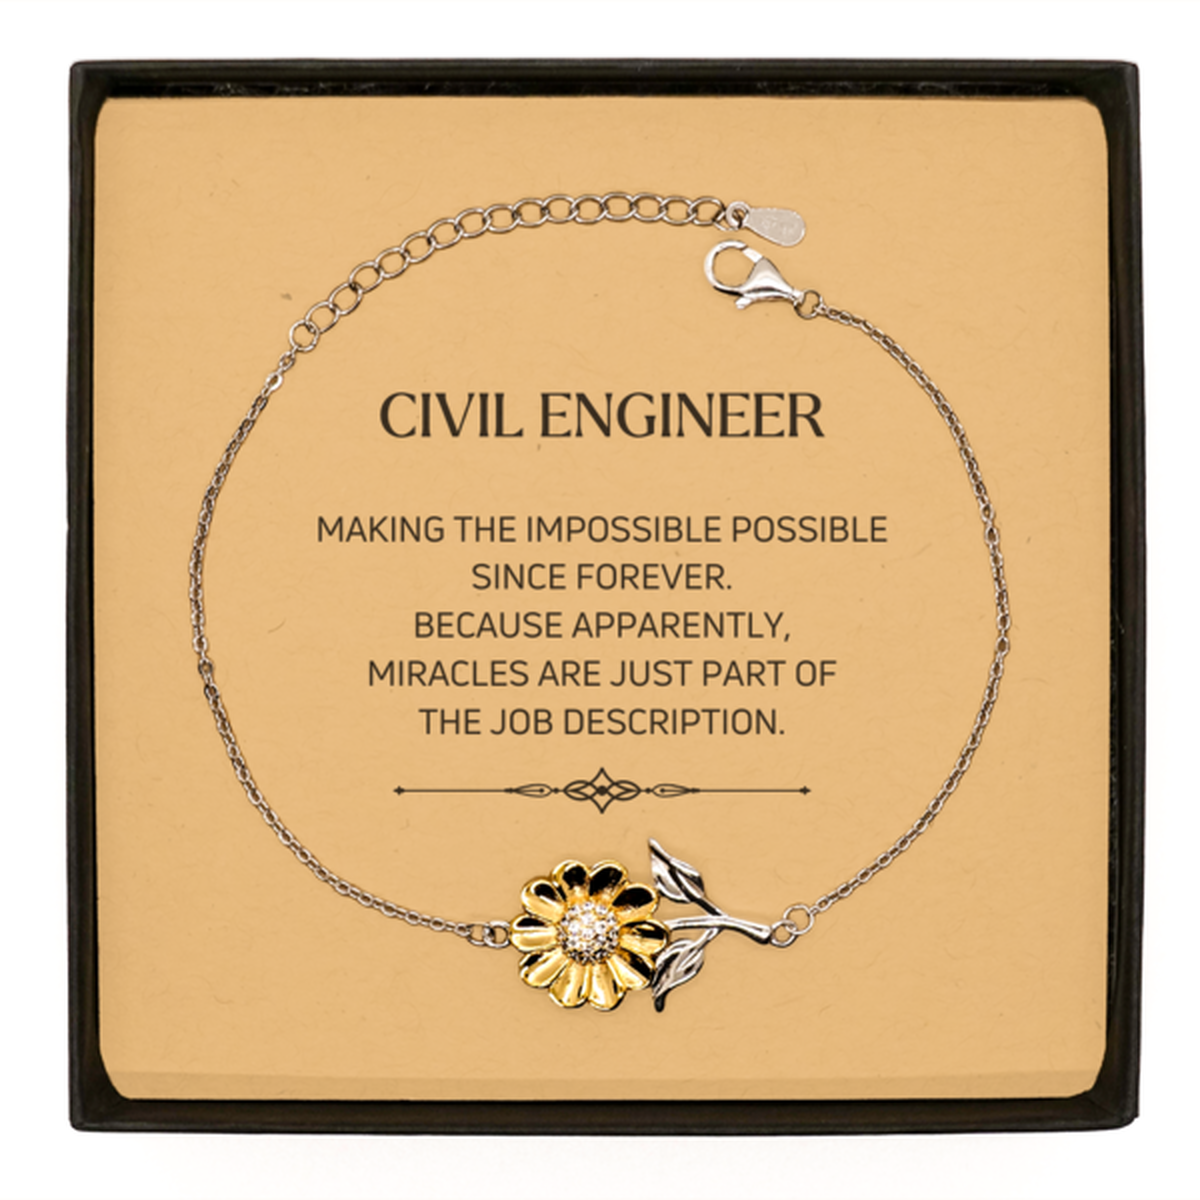 Funny Civil Engineer Gifts, Miracles are just part of the job description, Inspirational Birthday Sunflower Bracelet For Civil Engineer, Men, Women, Coworkers, Friends, Boss